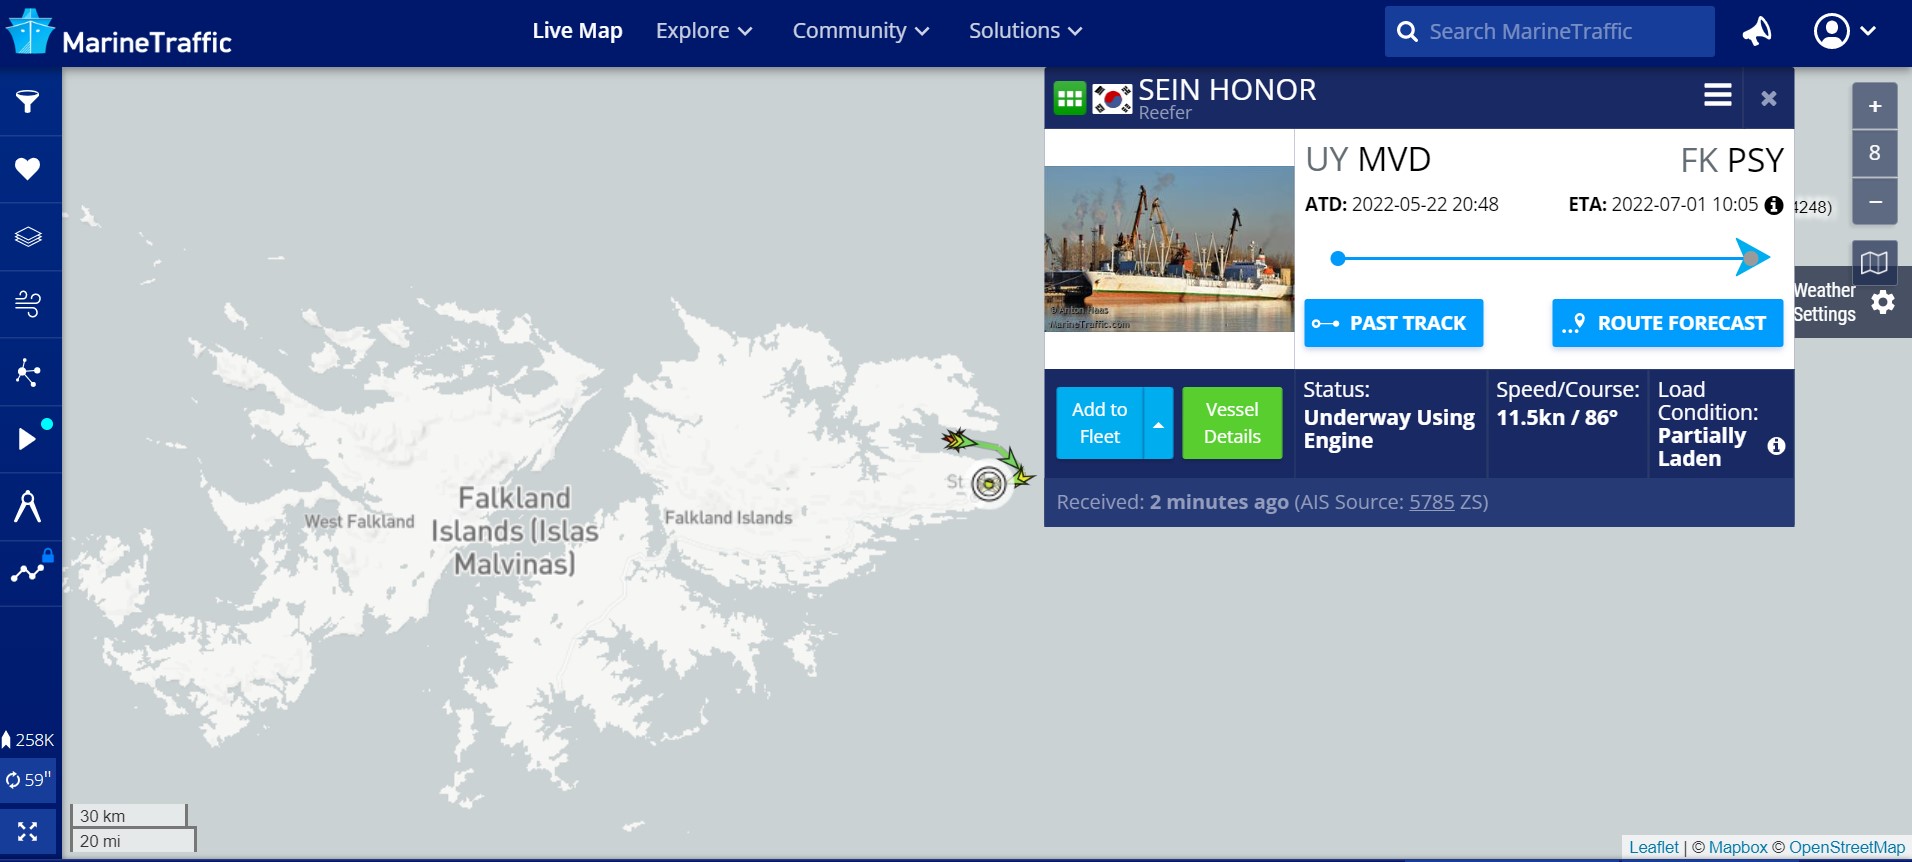 MarineTraffic ship tracking data shows the Sein Honor recent path